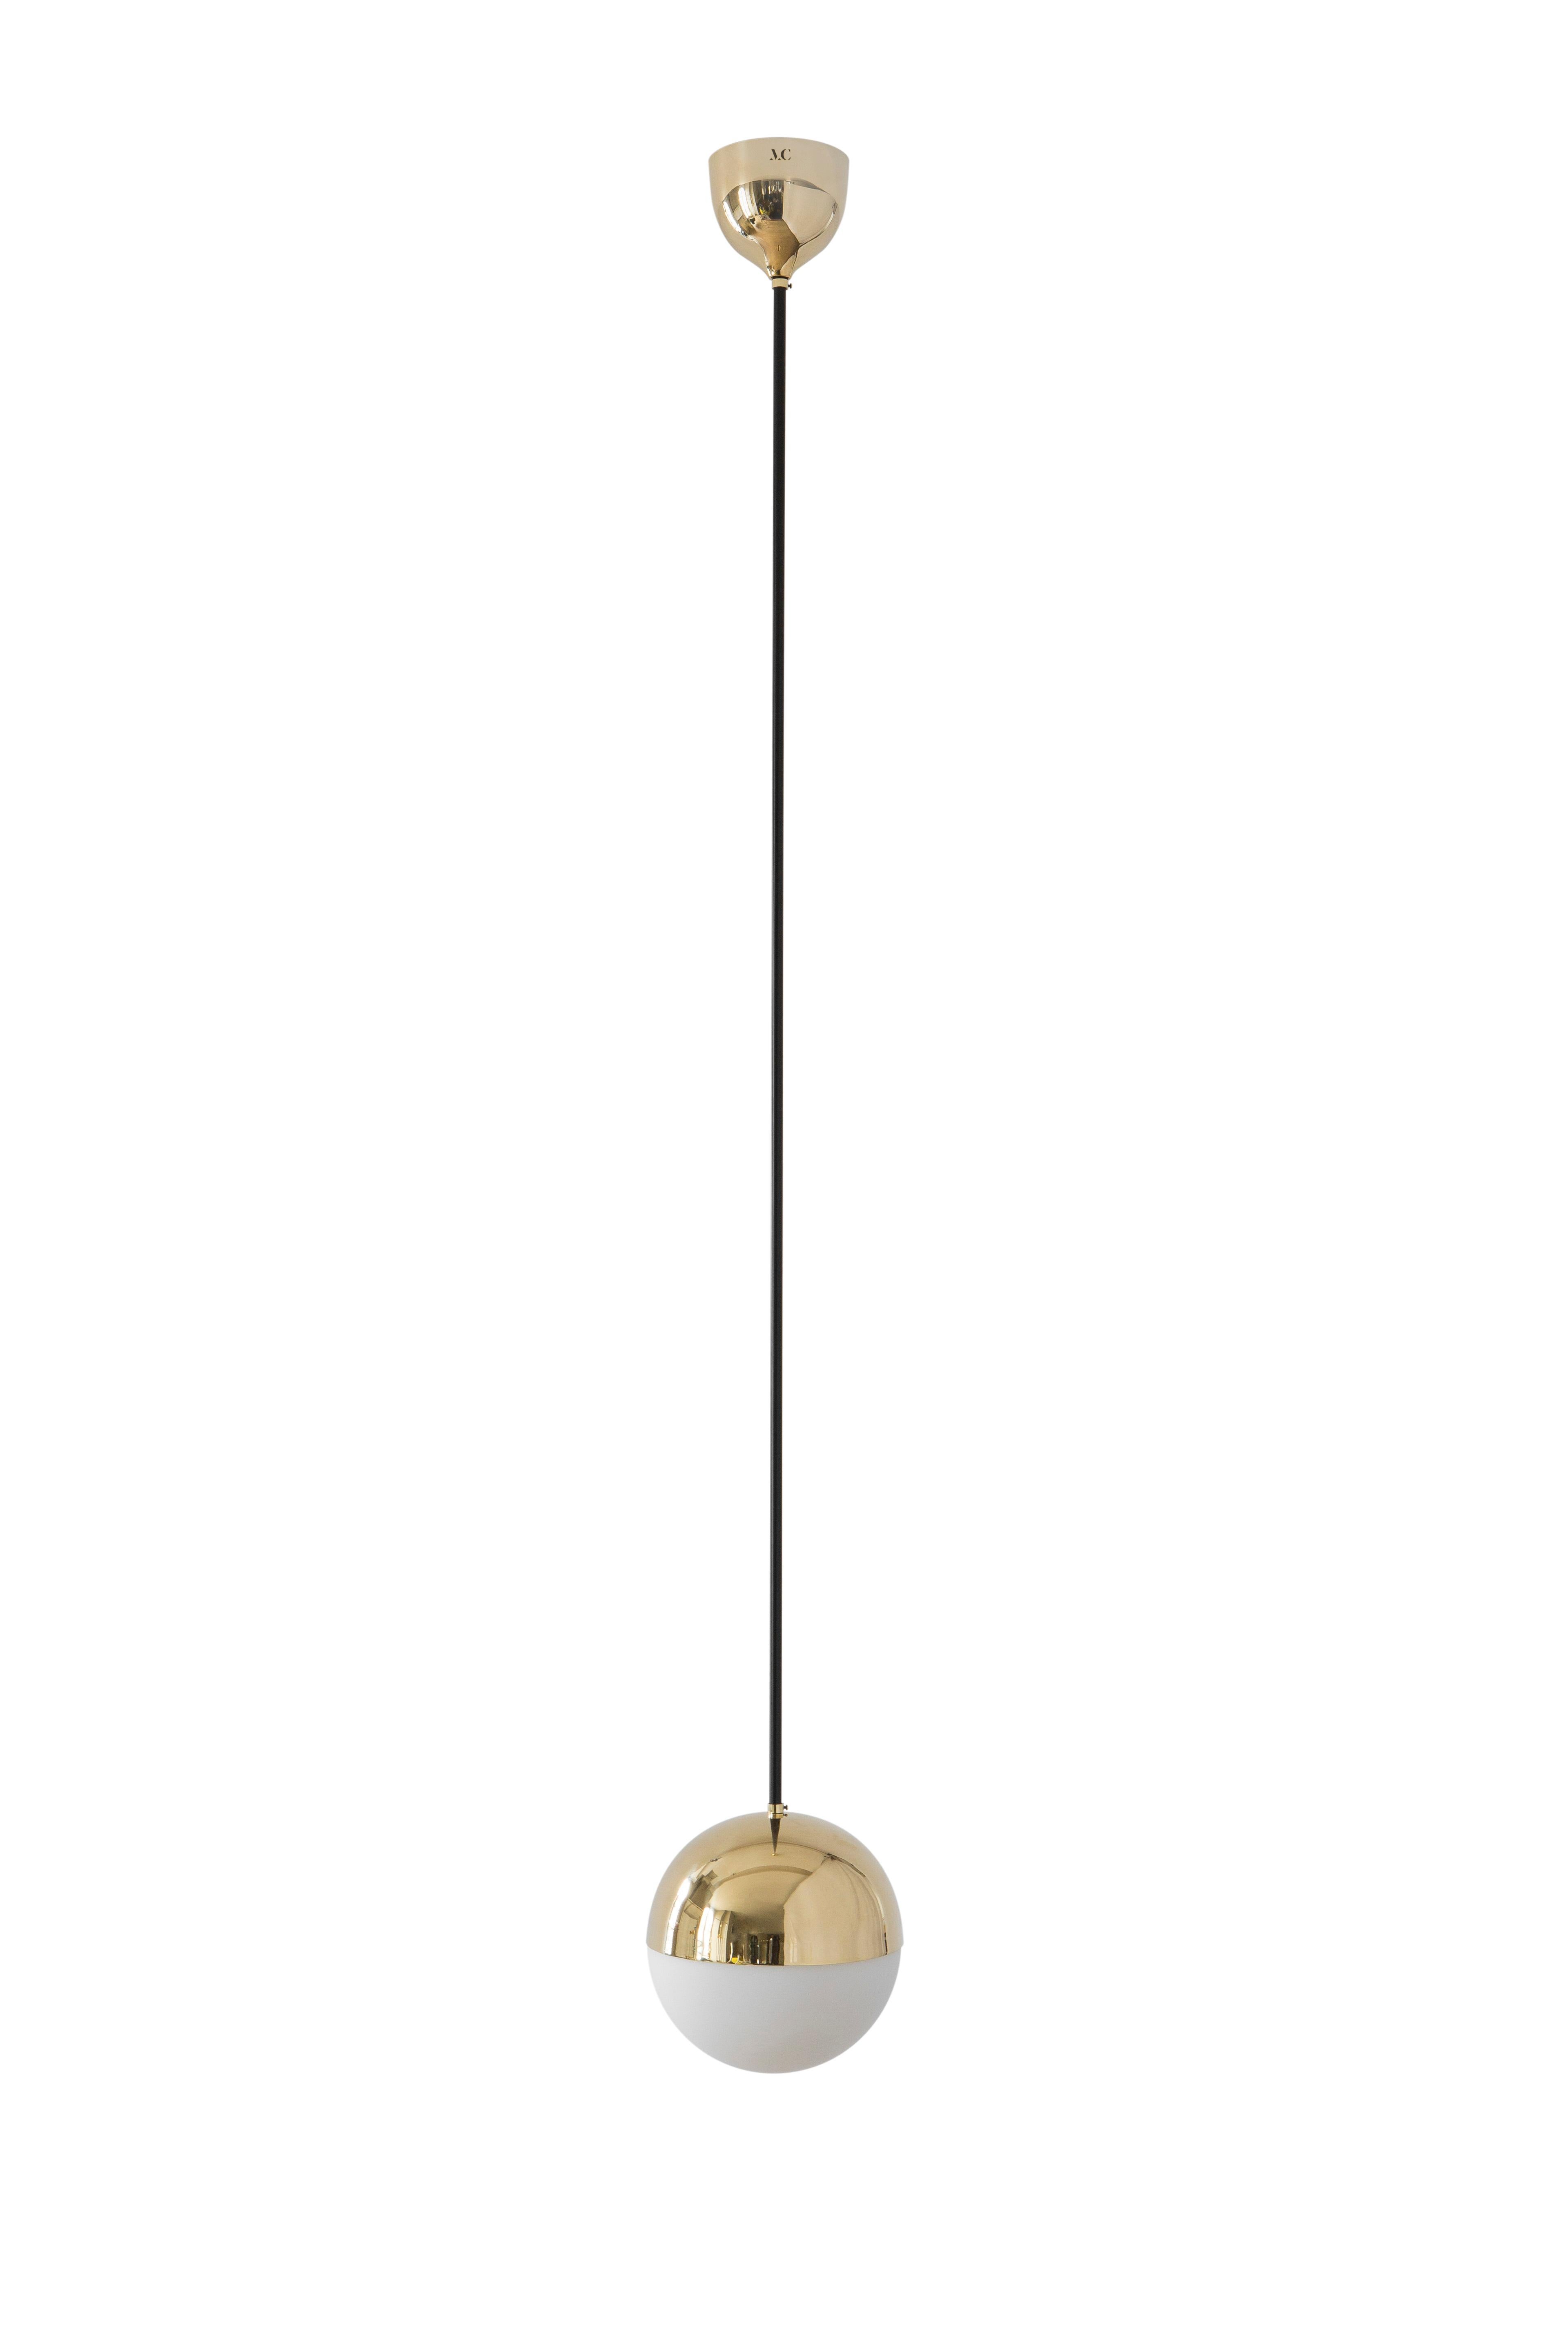 Pendant 01 by Magic Circus Editions
Dimensions: D 25 x W 25 x H 150 cm, also available in H 90, 110, 130, 150, 175 cm
Materials: Brass, mouth blown glass

All our lamps can be wired according to each country. If sold to the USA it will be wired